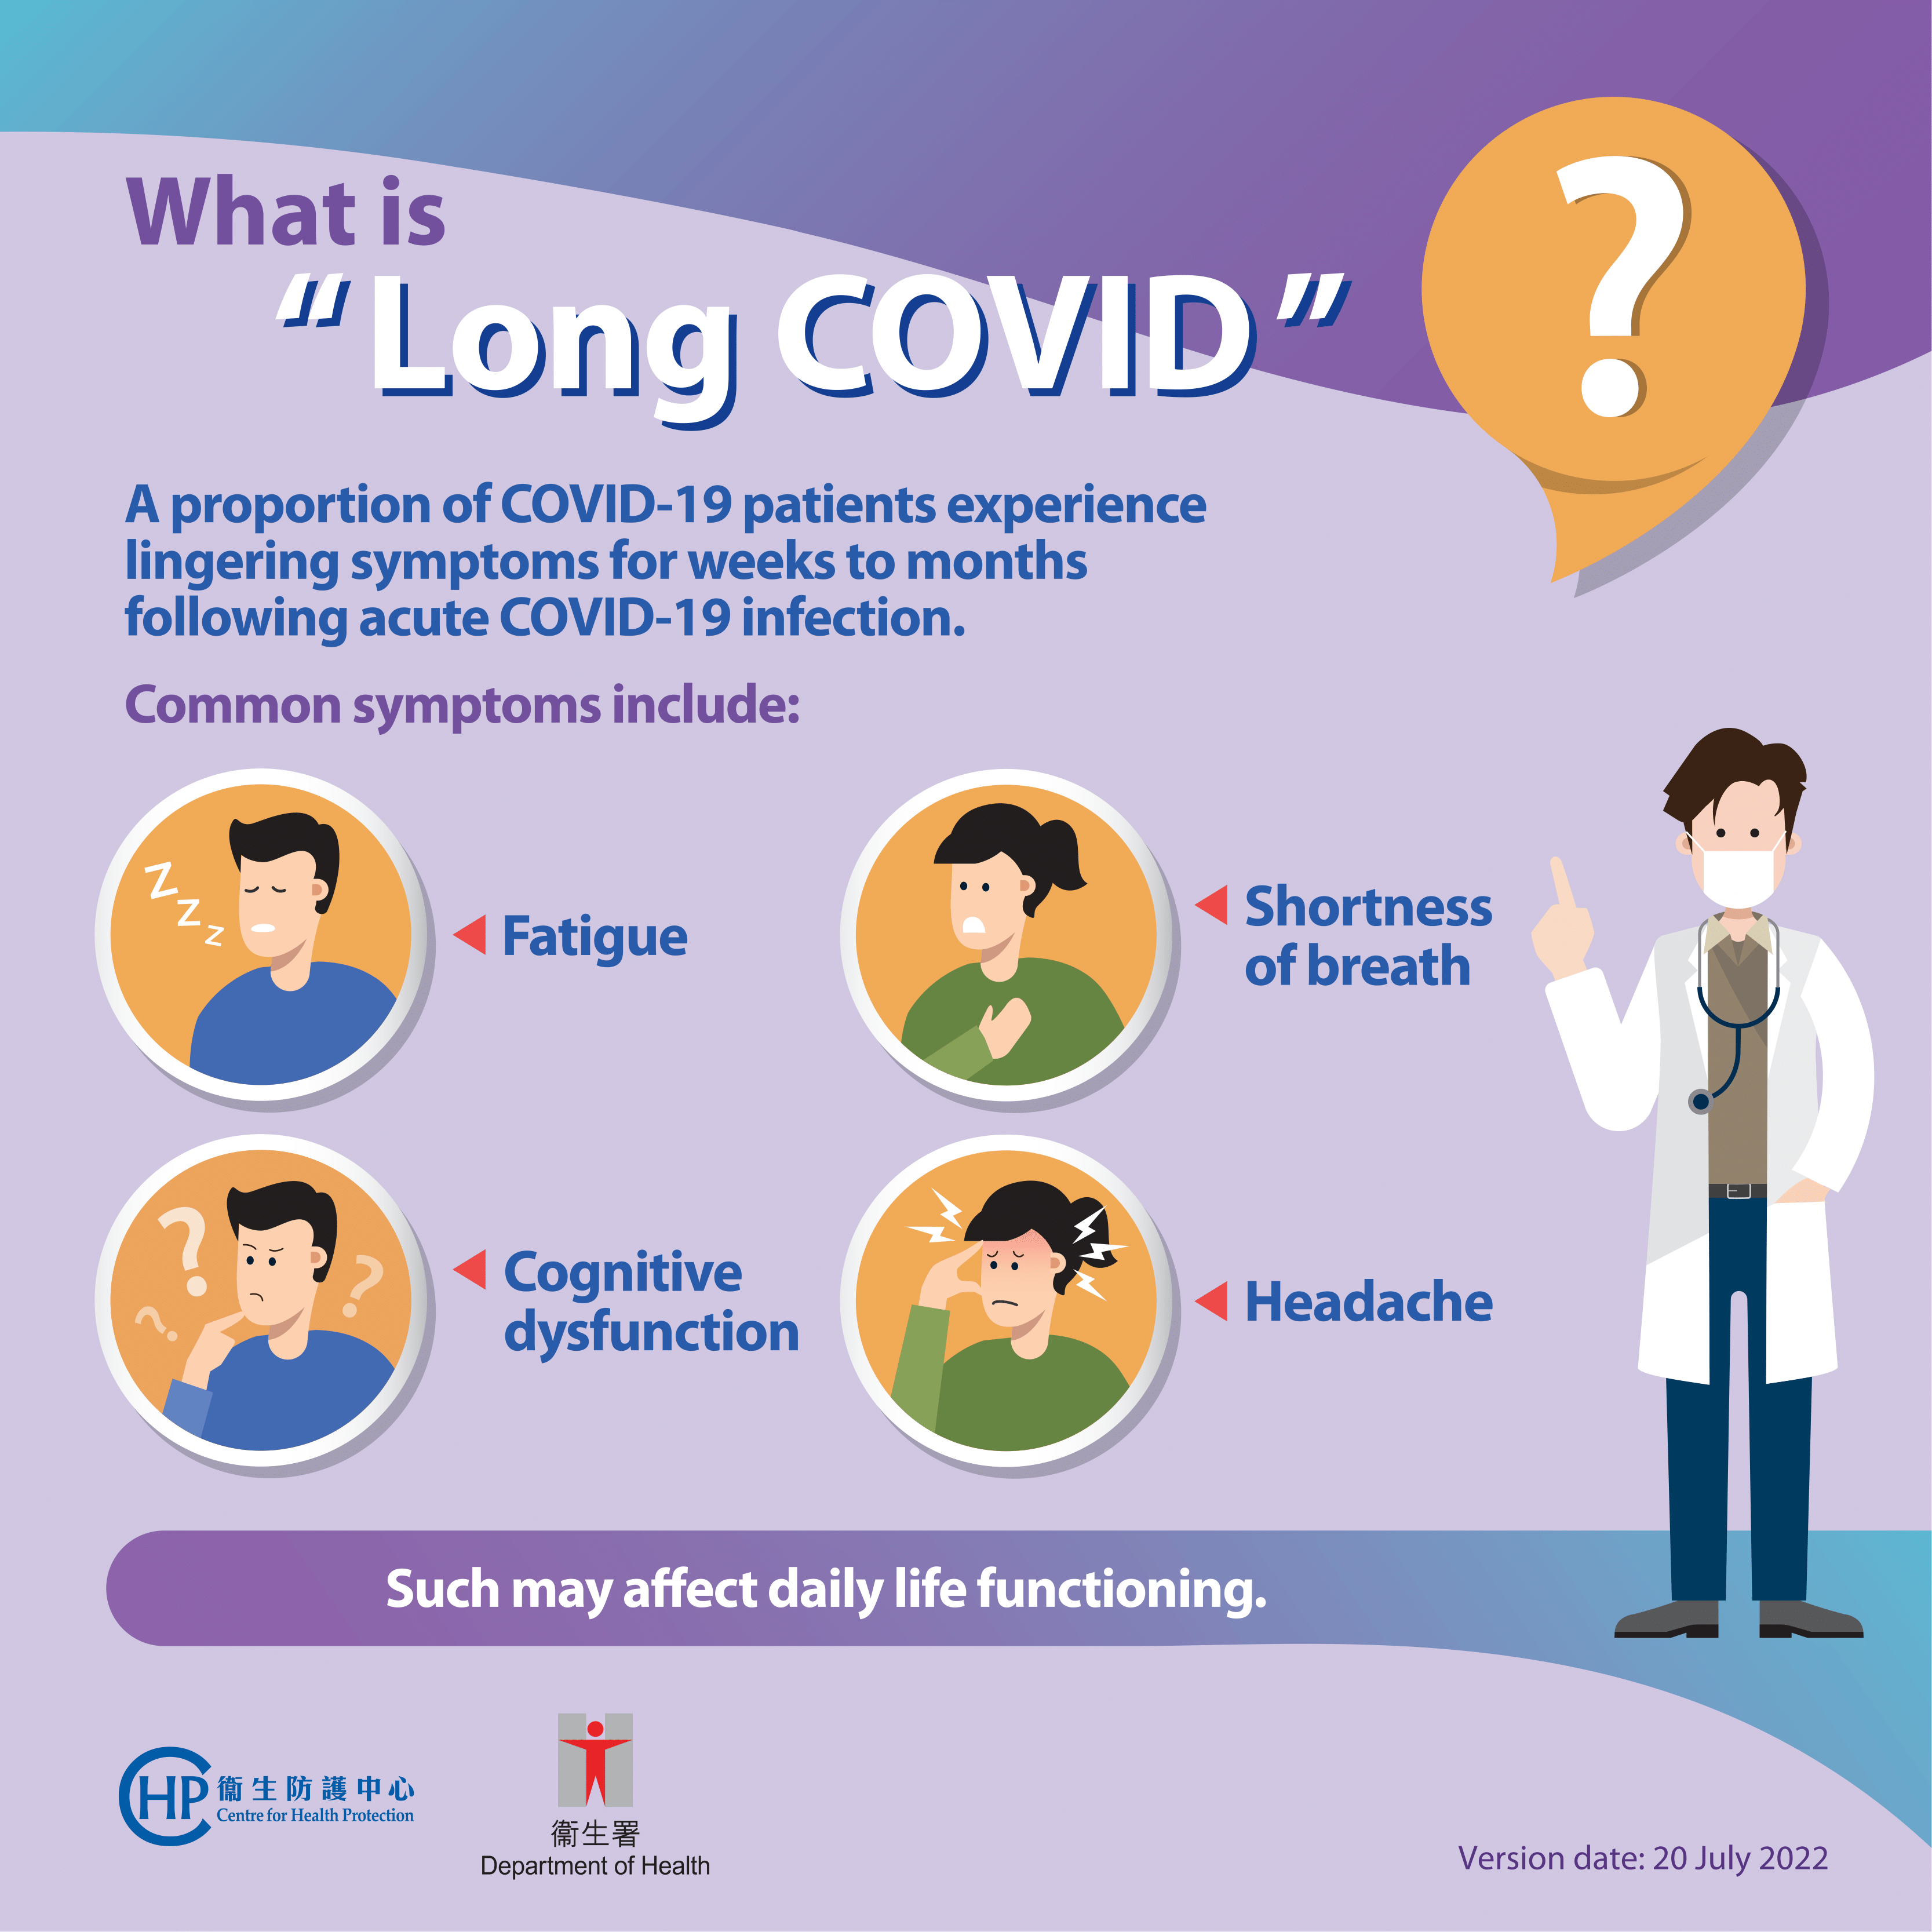 What is “Long COVID“